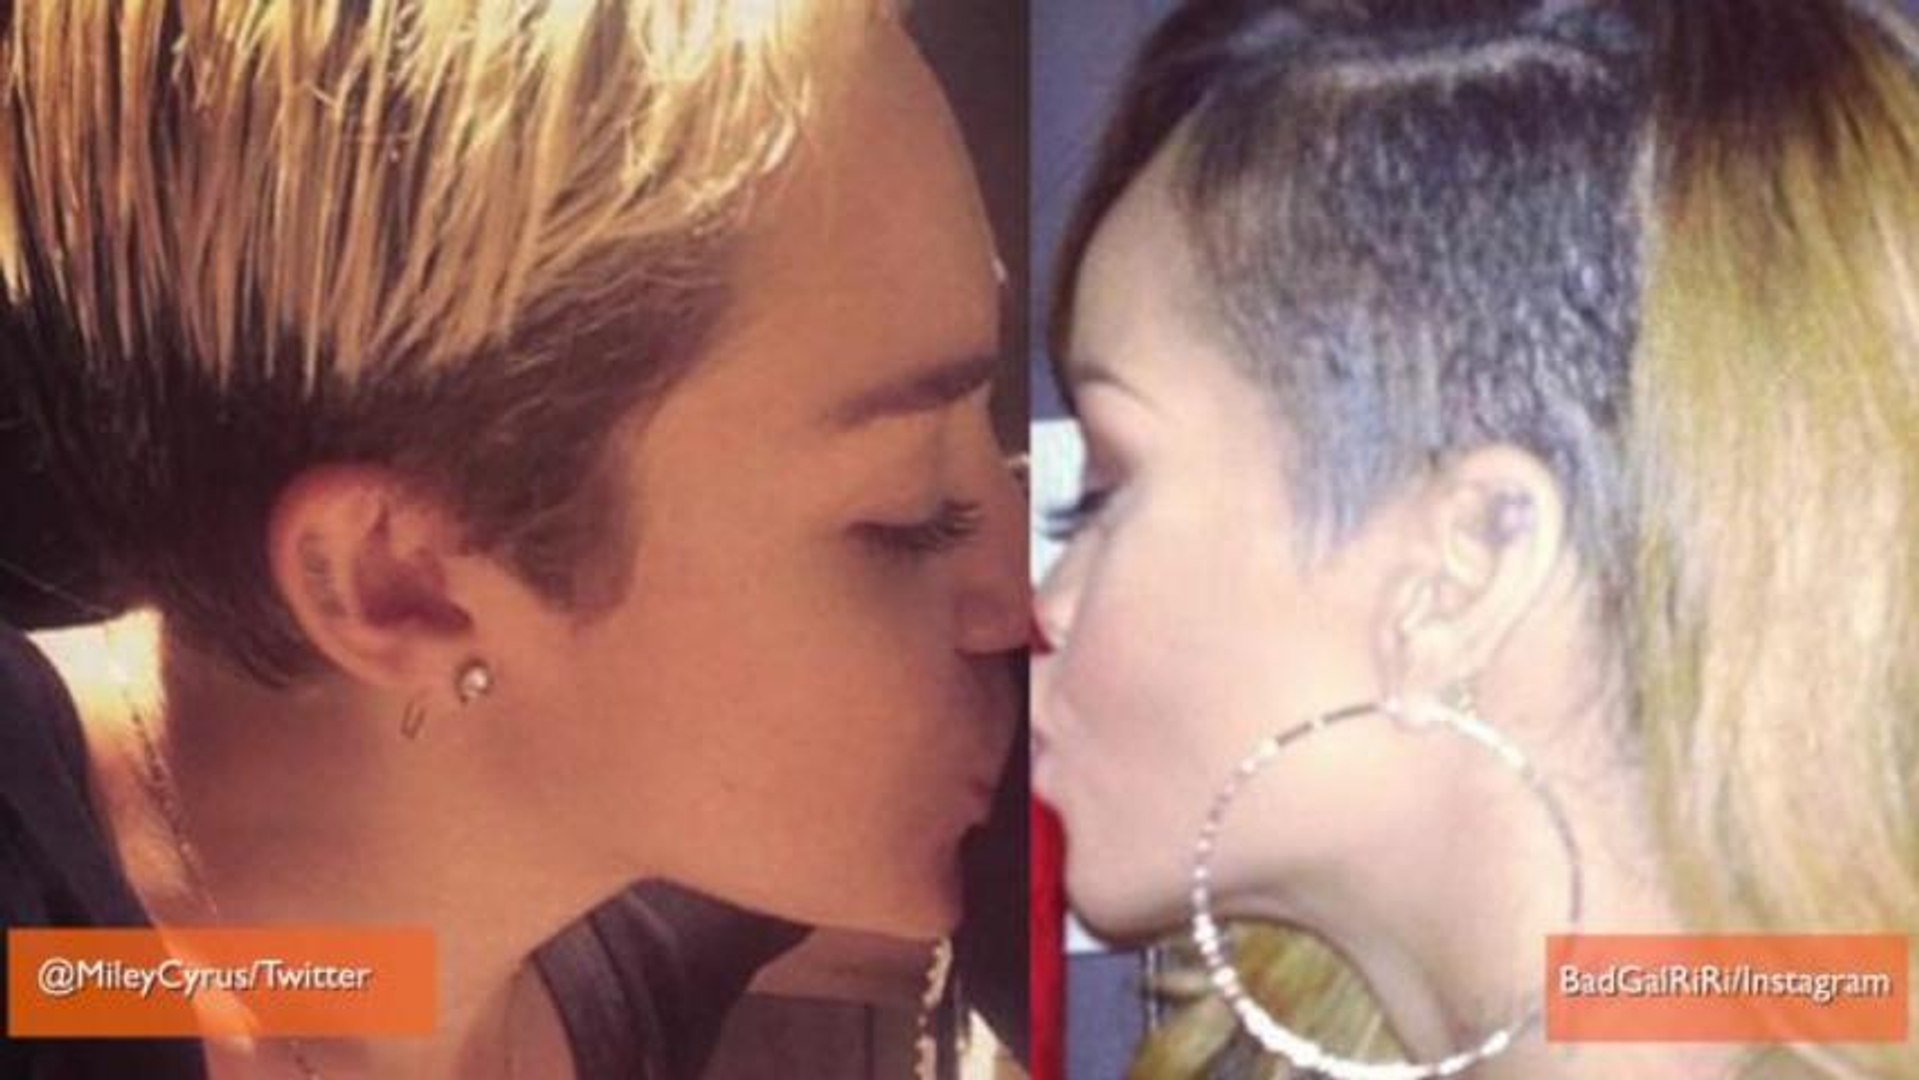 Miley Cyrus Would 'Definitely' Make Out With Rihanna